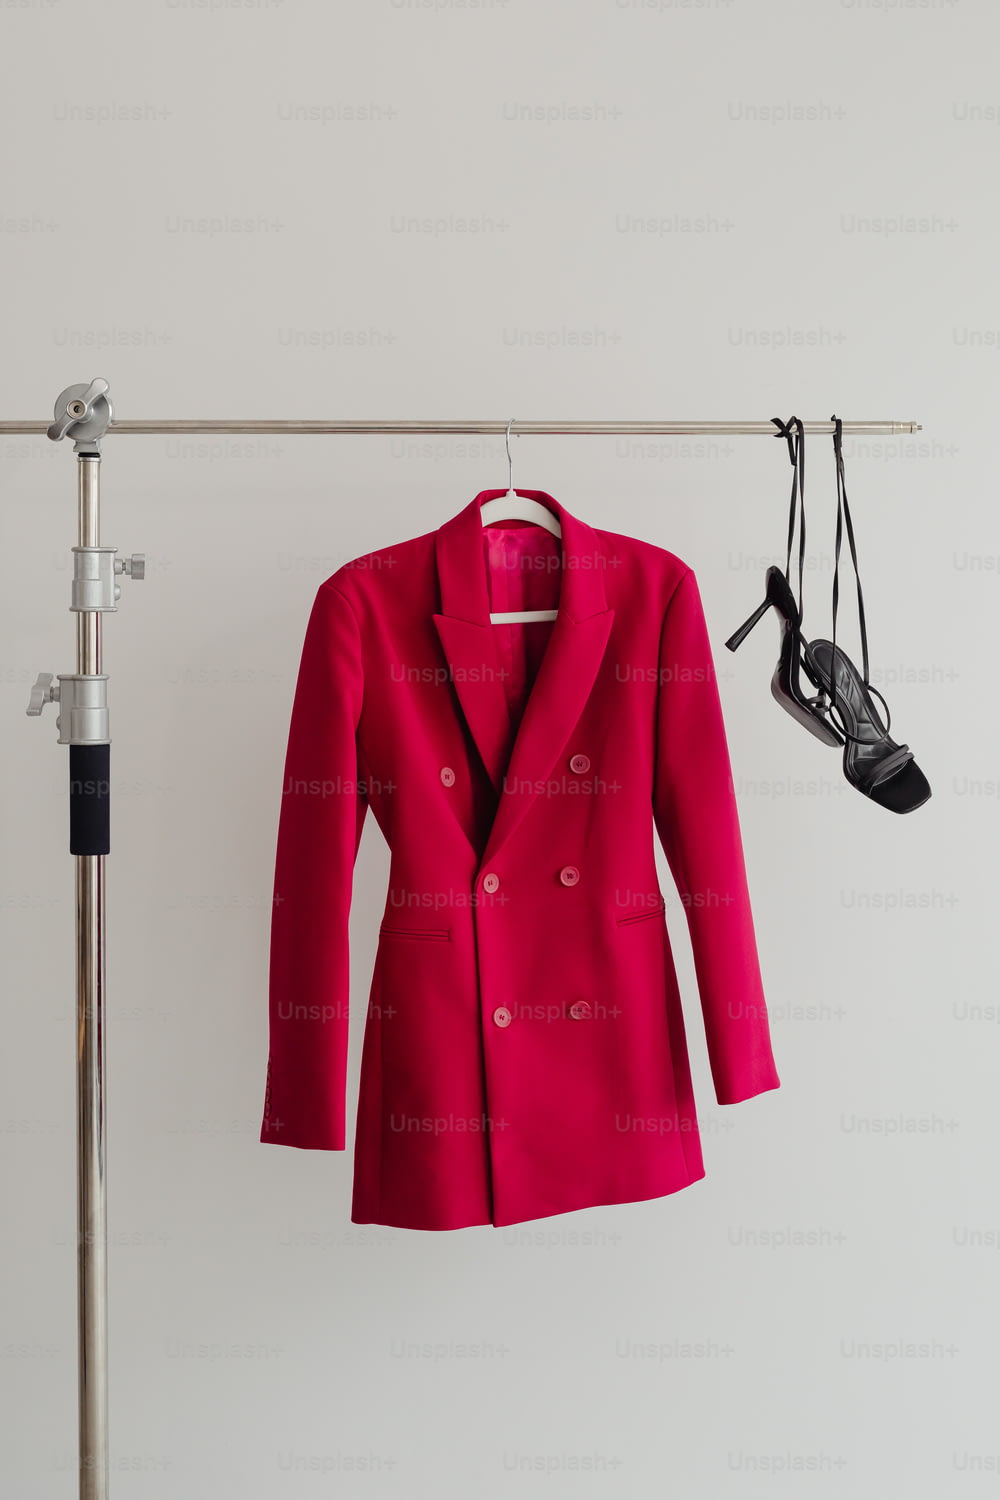 a red jacket hanging on a clothes rack